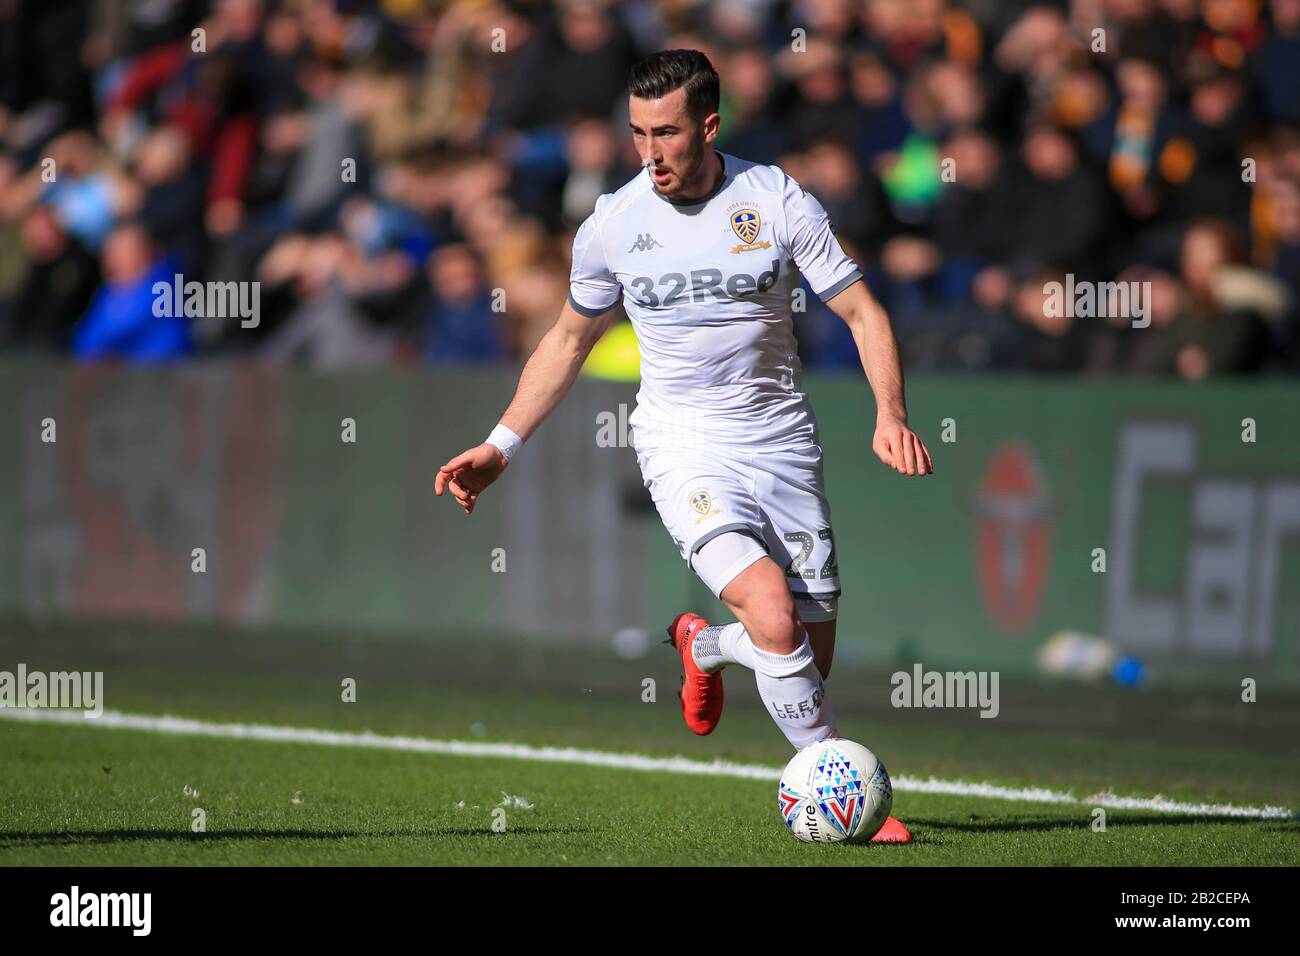 29th February 2020, KCOM Stadium, Hull, England; Sky Bet Championship, Hull City v Leeds United : Jack Harrison (22) of Leeds United in action during the game Stock Photo